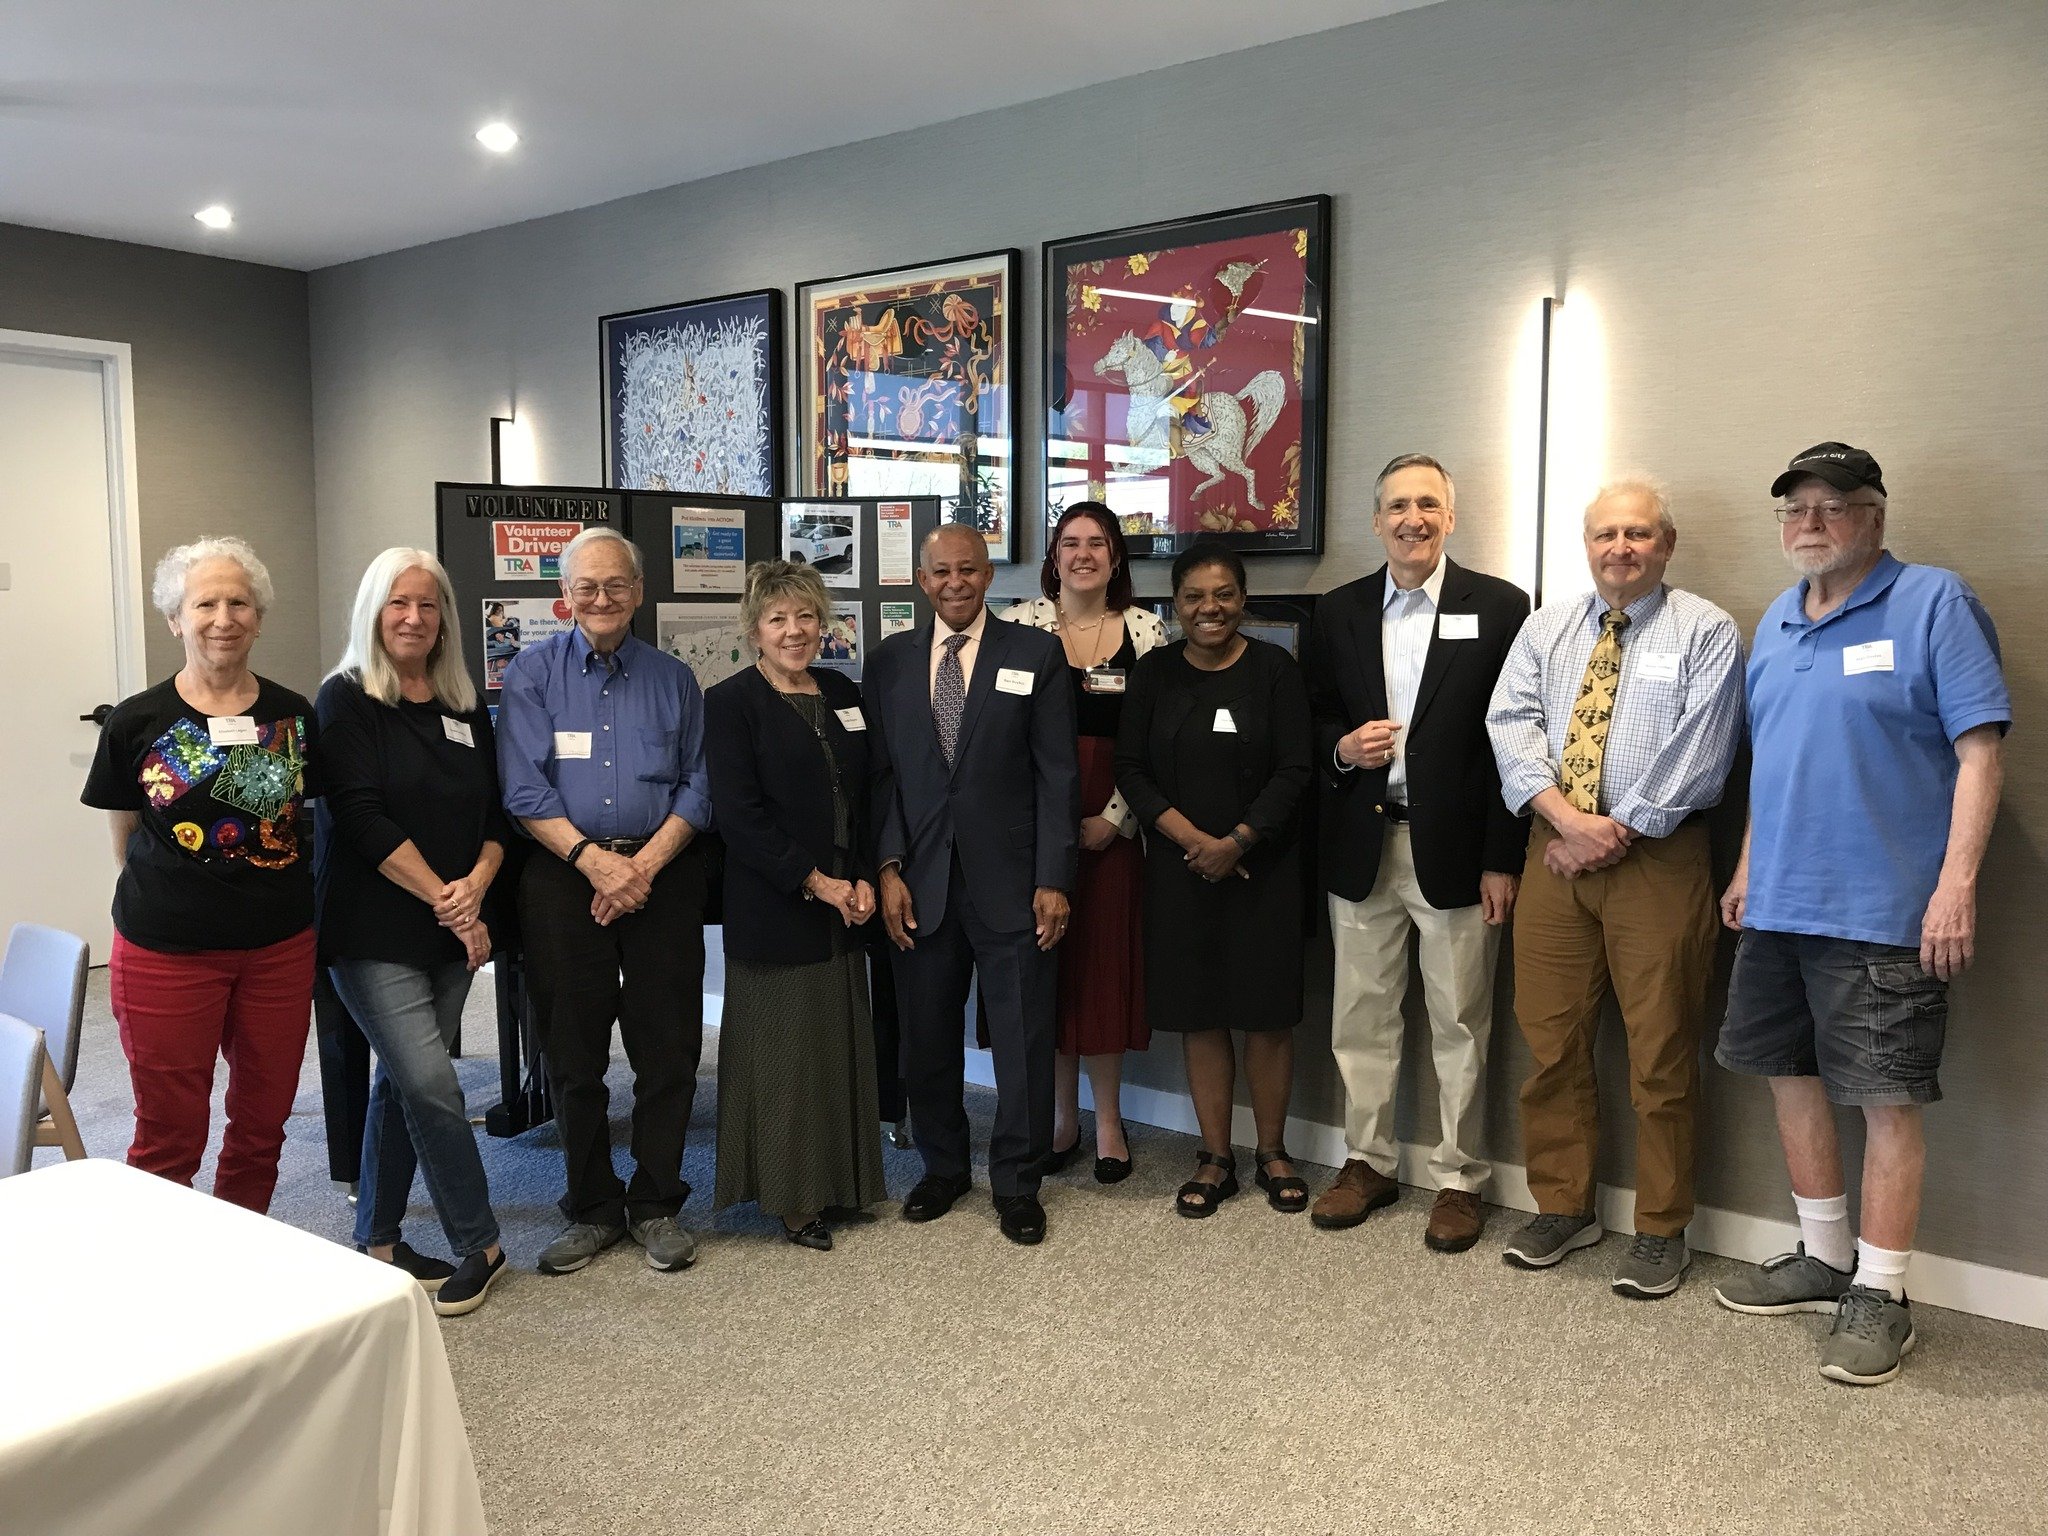 Transportation Resource Access (TRA) is an organization that coordinates rides doctor's offices throughout Westchester. This tremendous service relies on volunteer drivers, who they honored at an appreciation luncheon last Tuesday. My wonderful Aide,